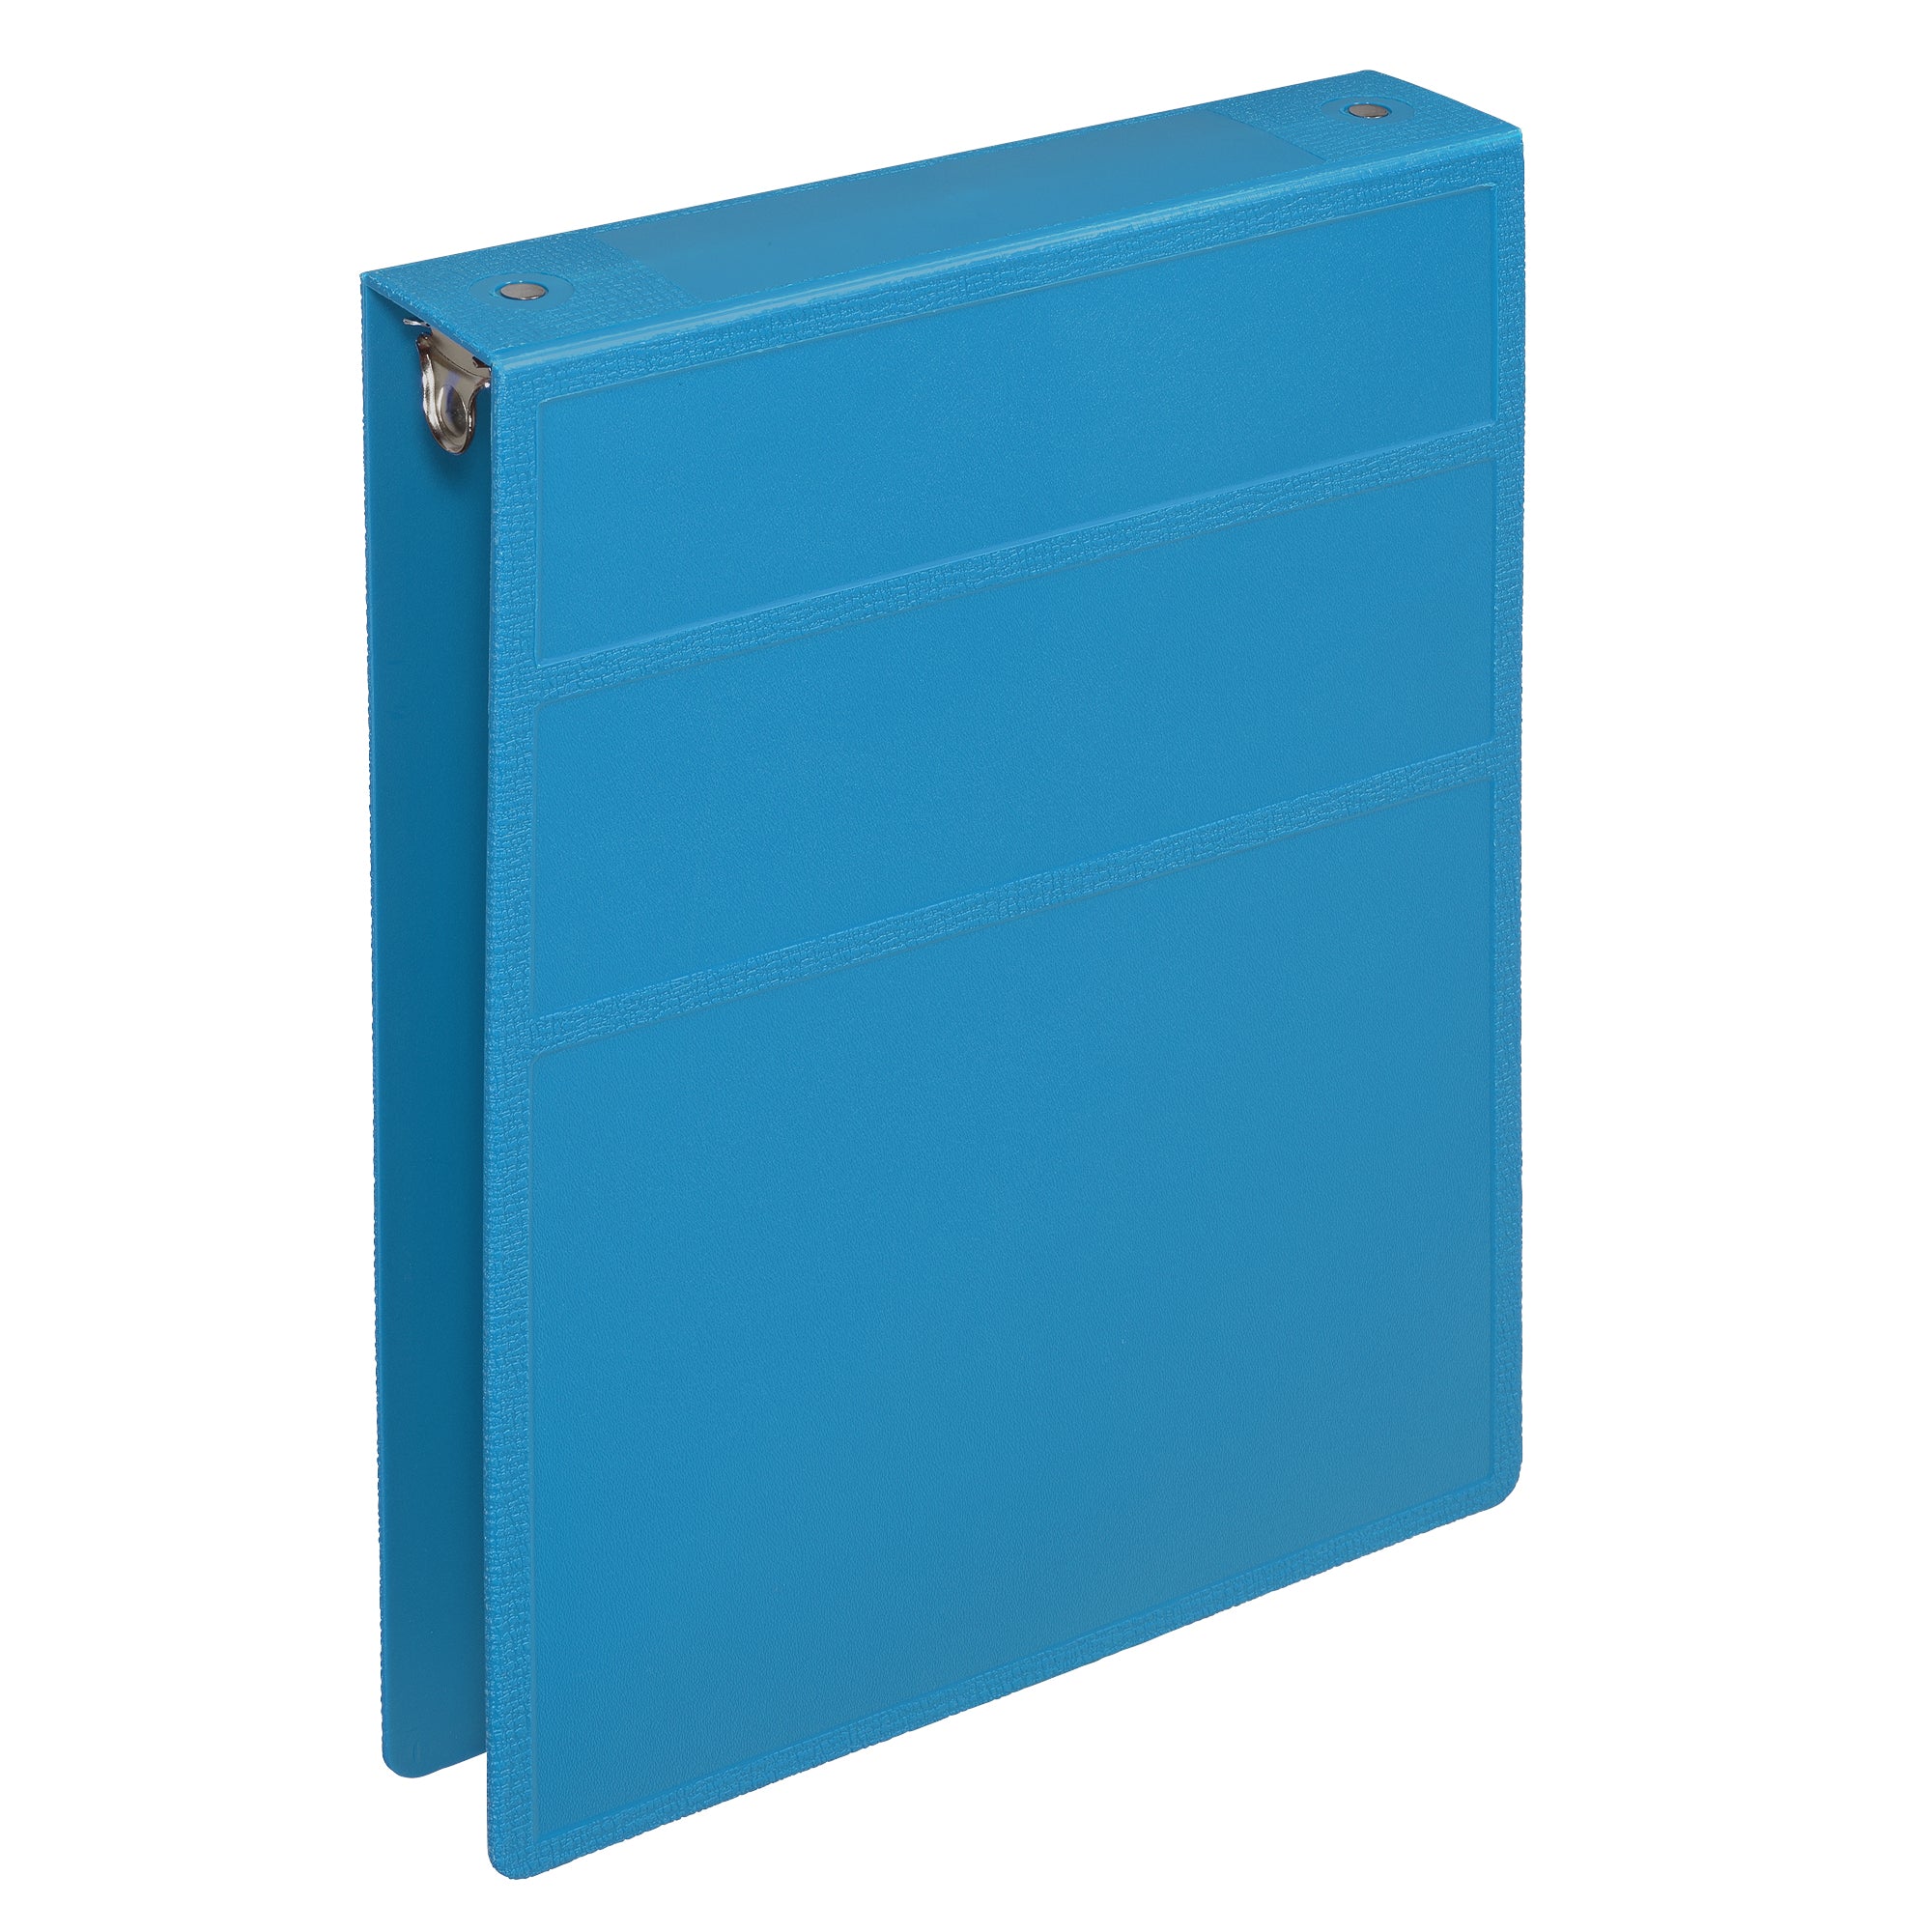 Notebook Folder with Ring Binder | Ring Binder File Folder | Customized  Diaries and Notebooks - promotionalwears.com